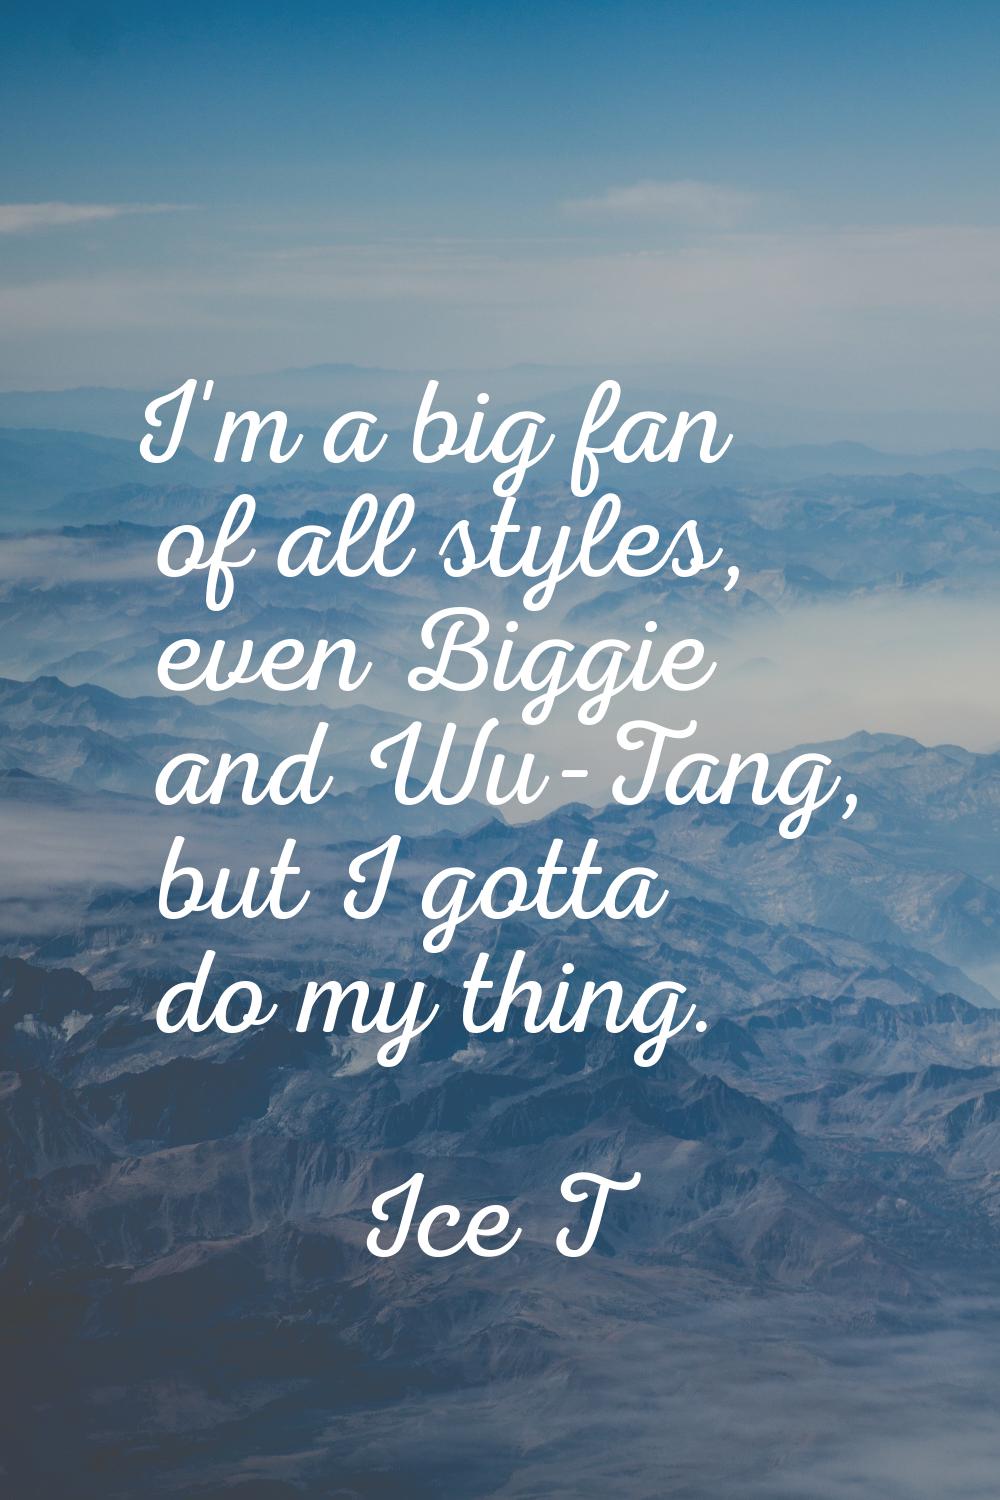 I'm a big fan of all styles, even Biggie and Wu-Tang, but I gotta do my thing.